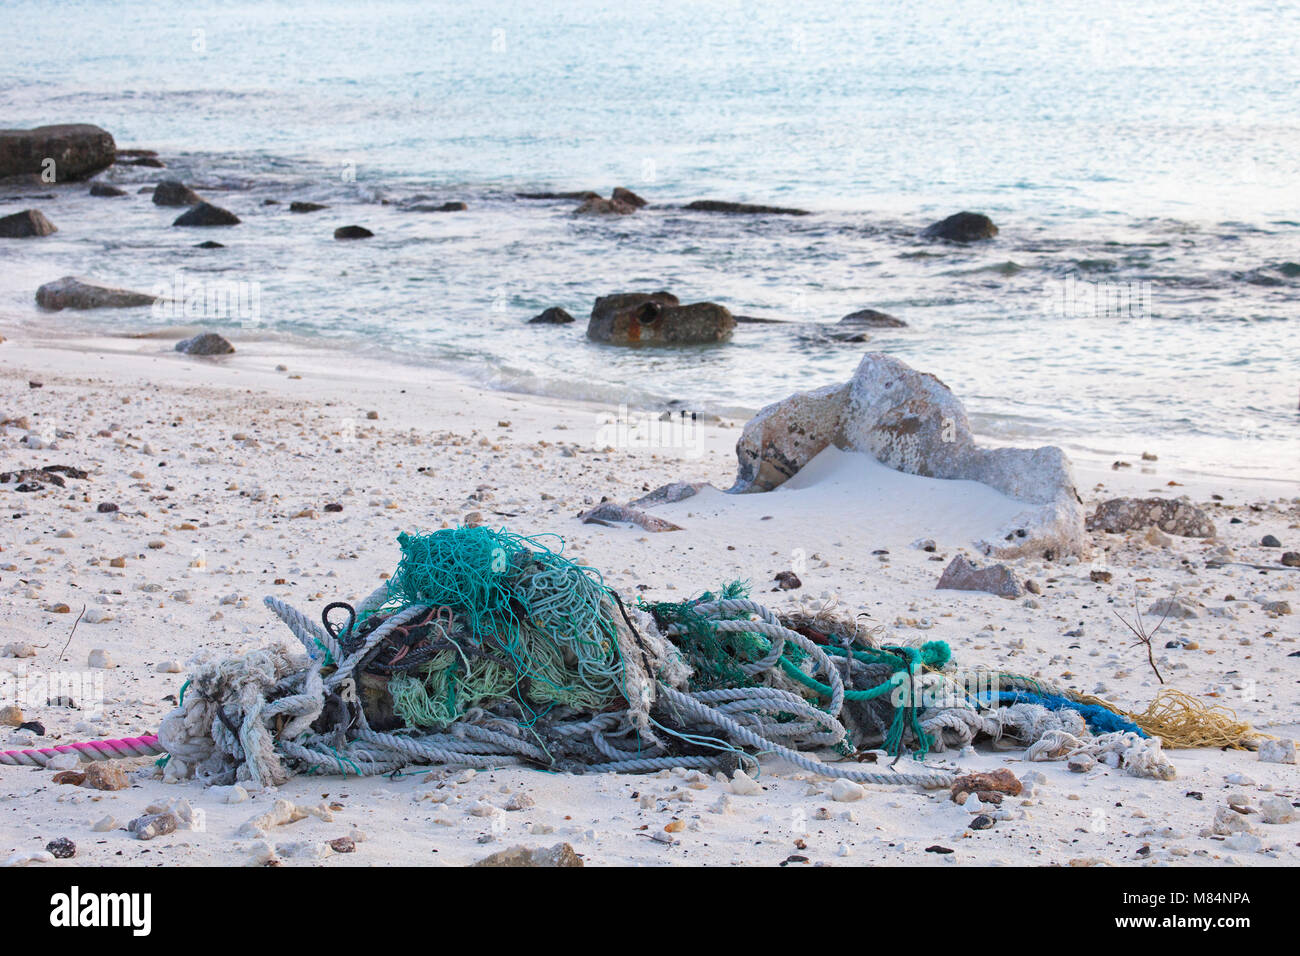 Ropes and nets collected along the coast of a North Pacific island by tourists for proper disposal to prevent harm to marine wildlife Stock Photo